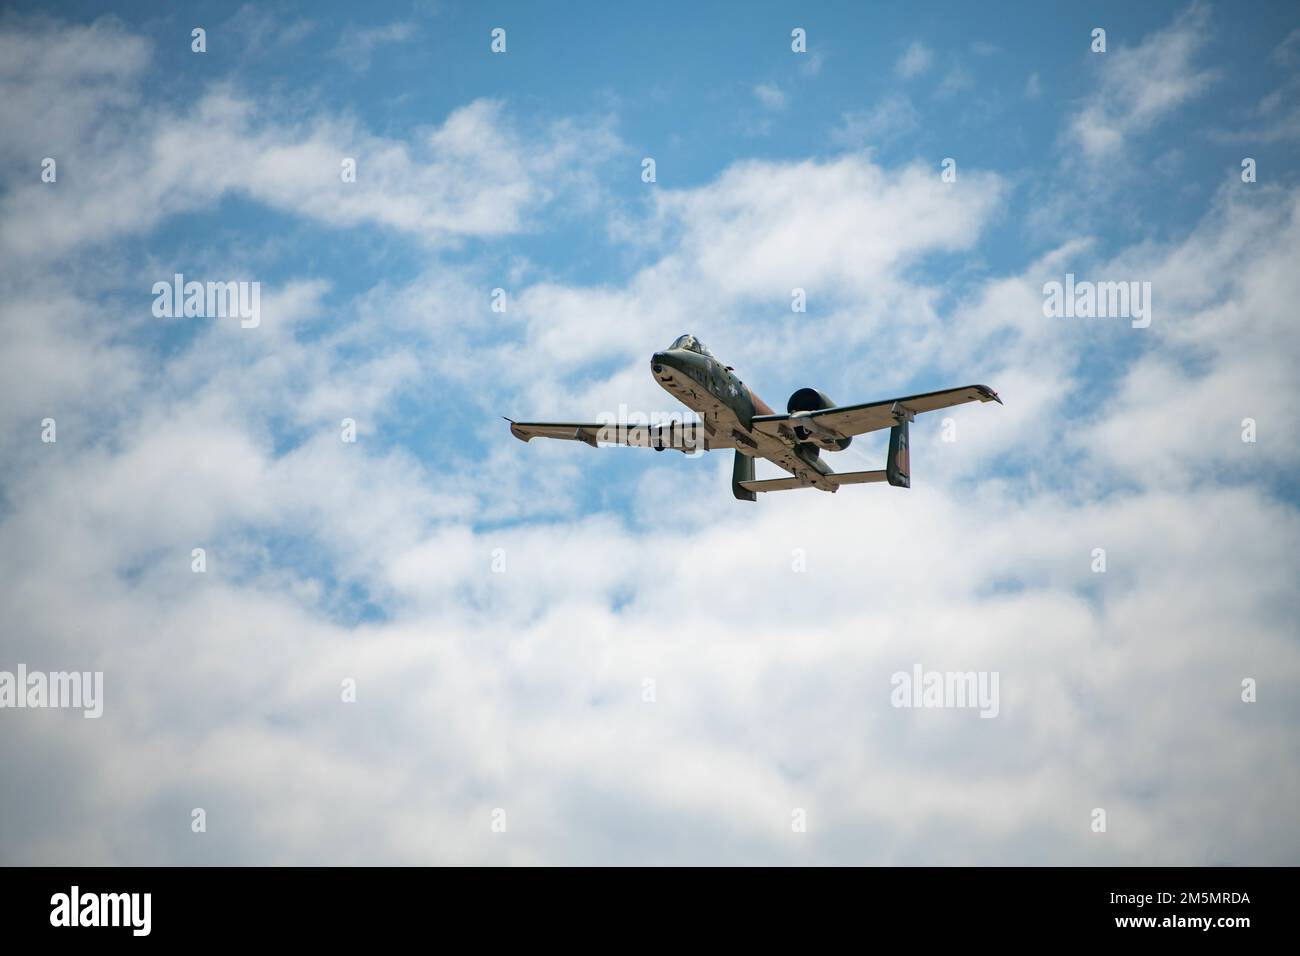 The Air Combat Command A-10C Thunderbolt II Demonstration Team flies their aircraft during the Wings Over Columbus 2022 Airshow March 27, 2022, on Columbus Air Force Base, MS. The A-10C Thunderbolt II is the first Air Force aircraft specially designed for close air support of ground forces. Stock Photo